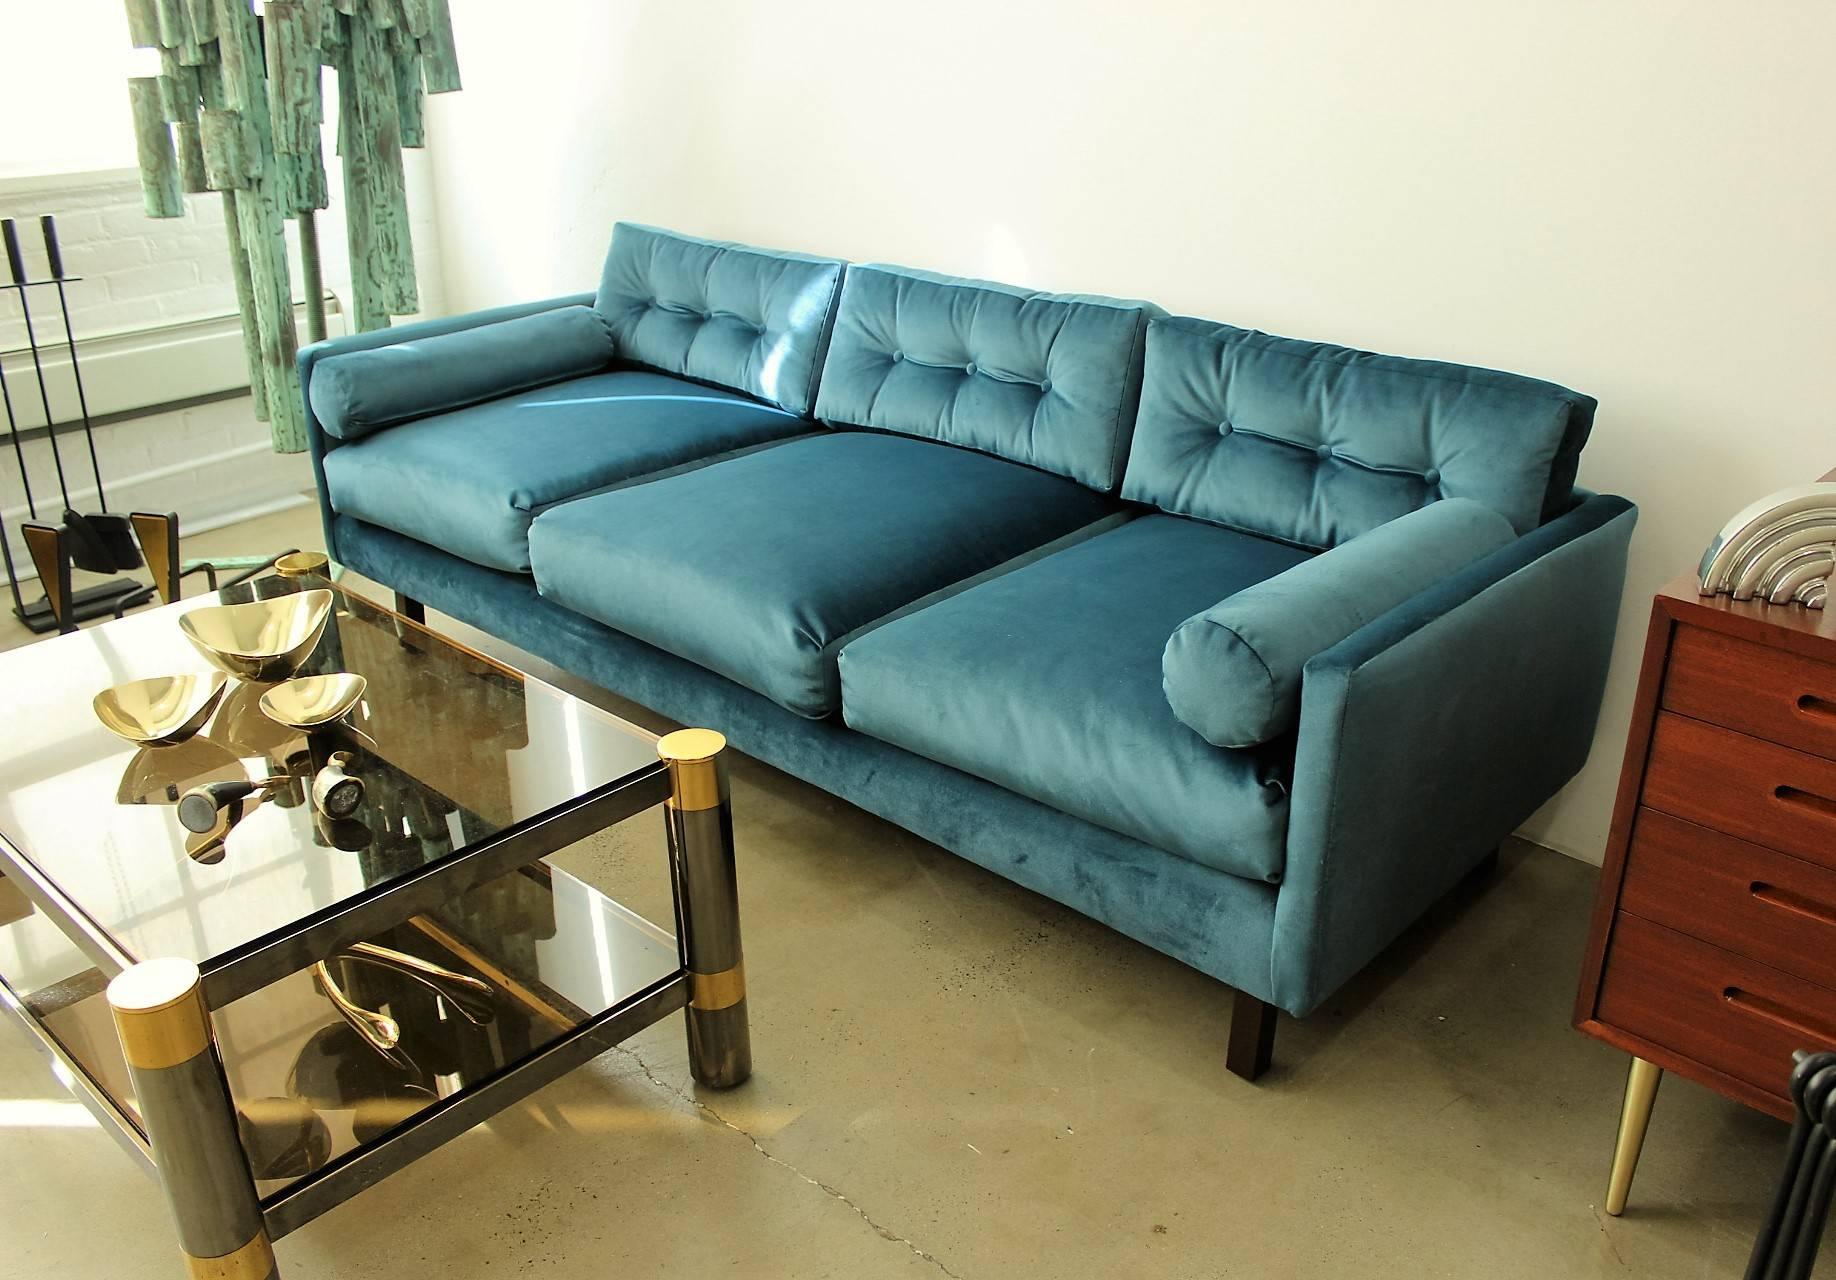 Harvey Probber Tuxedo sofa in peacock velvet with down cushions, 1960s. Completely restored in a rich peacock velvet and fitted with down cushions. Very comfortable and sturdy. 

See this item in our private NYC showroom! Refine Limited is located